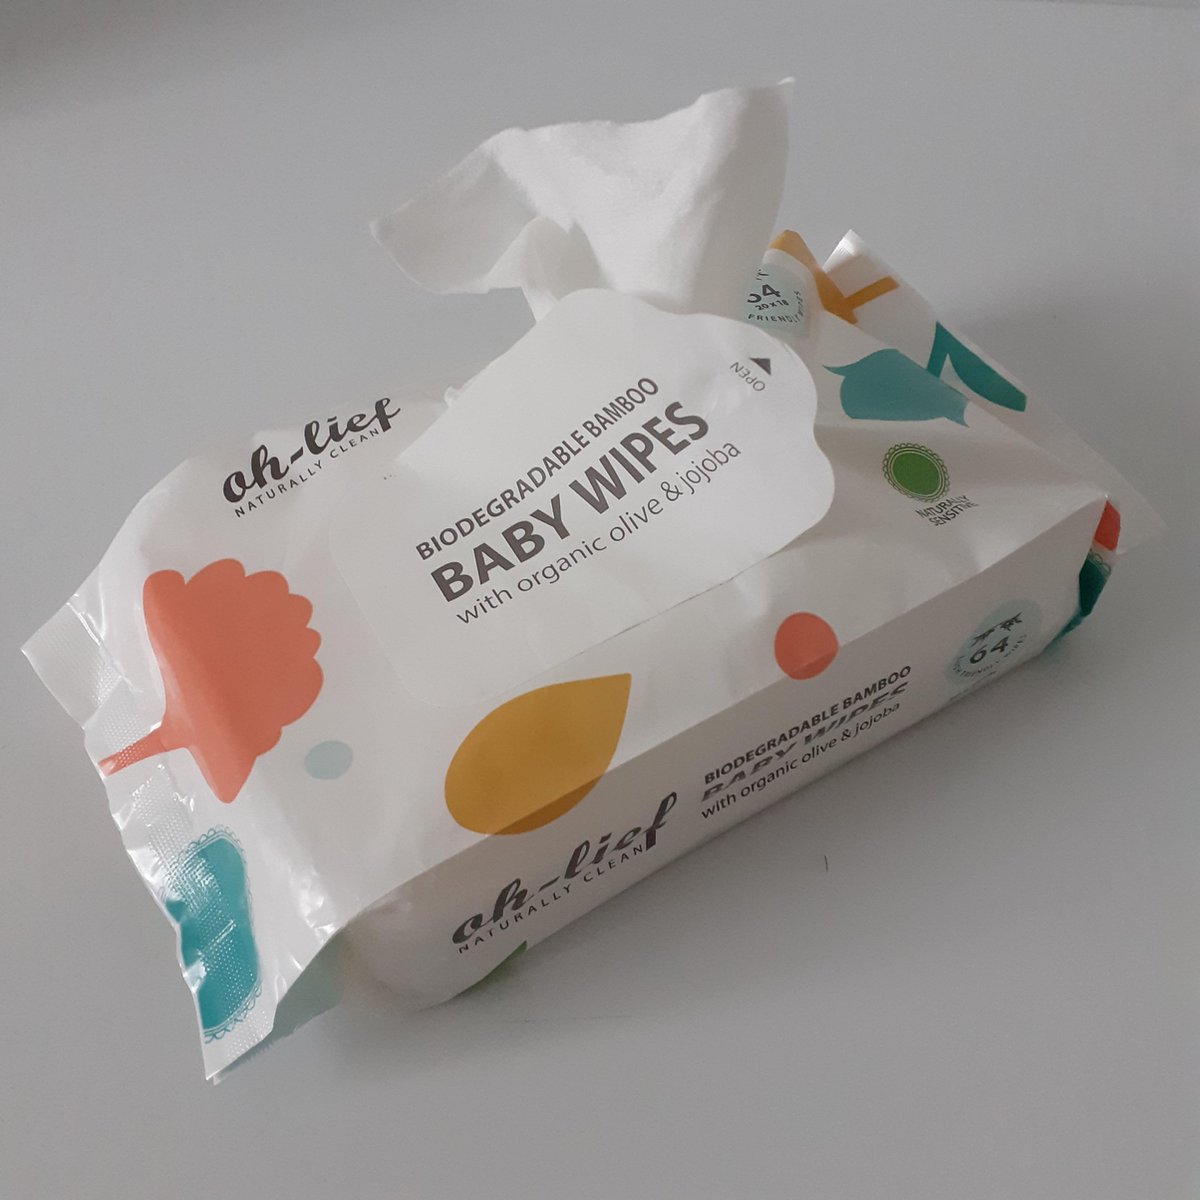 Oh-Lief Biodegradable Bamboo Baby Wipes (3 x 64 doekjes) | bol.com